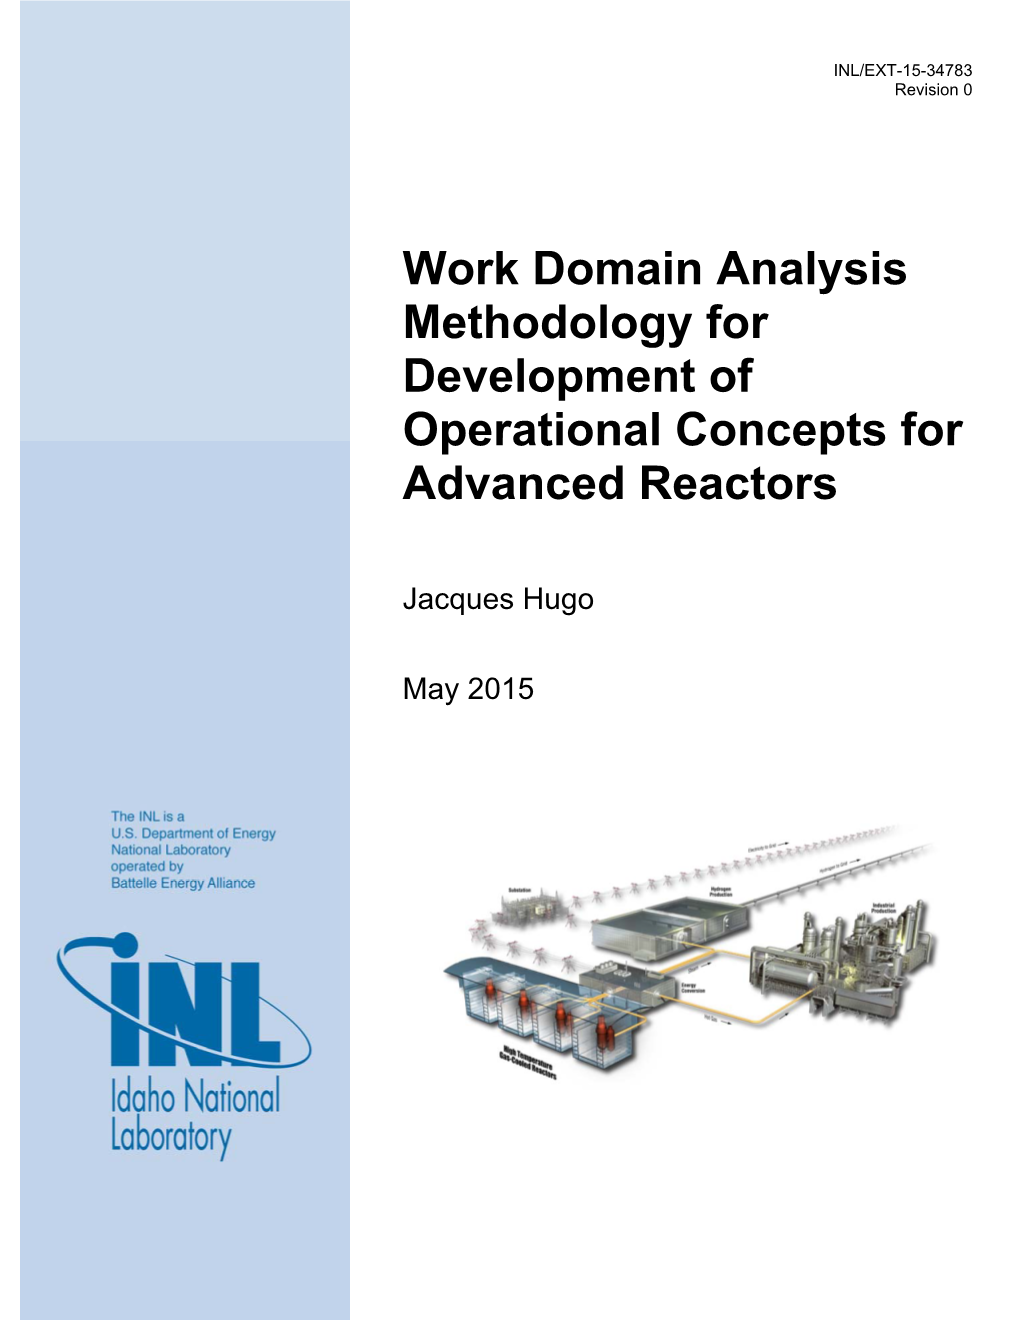 Work Domain Analysis Methodology for Development of Operational Concepts for Advanced Reactors